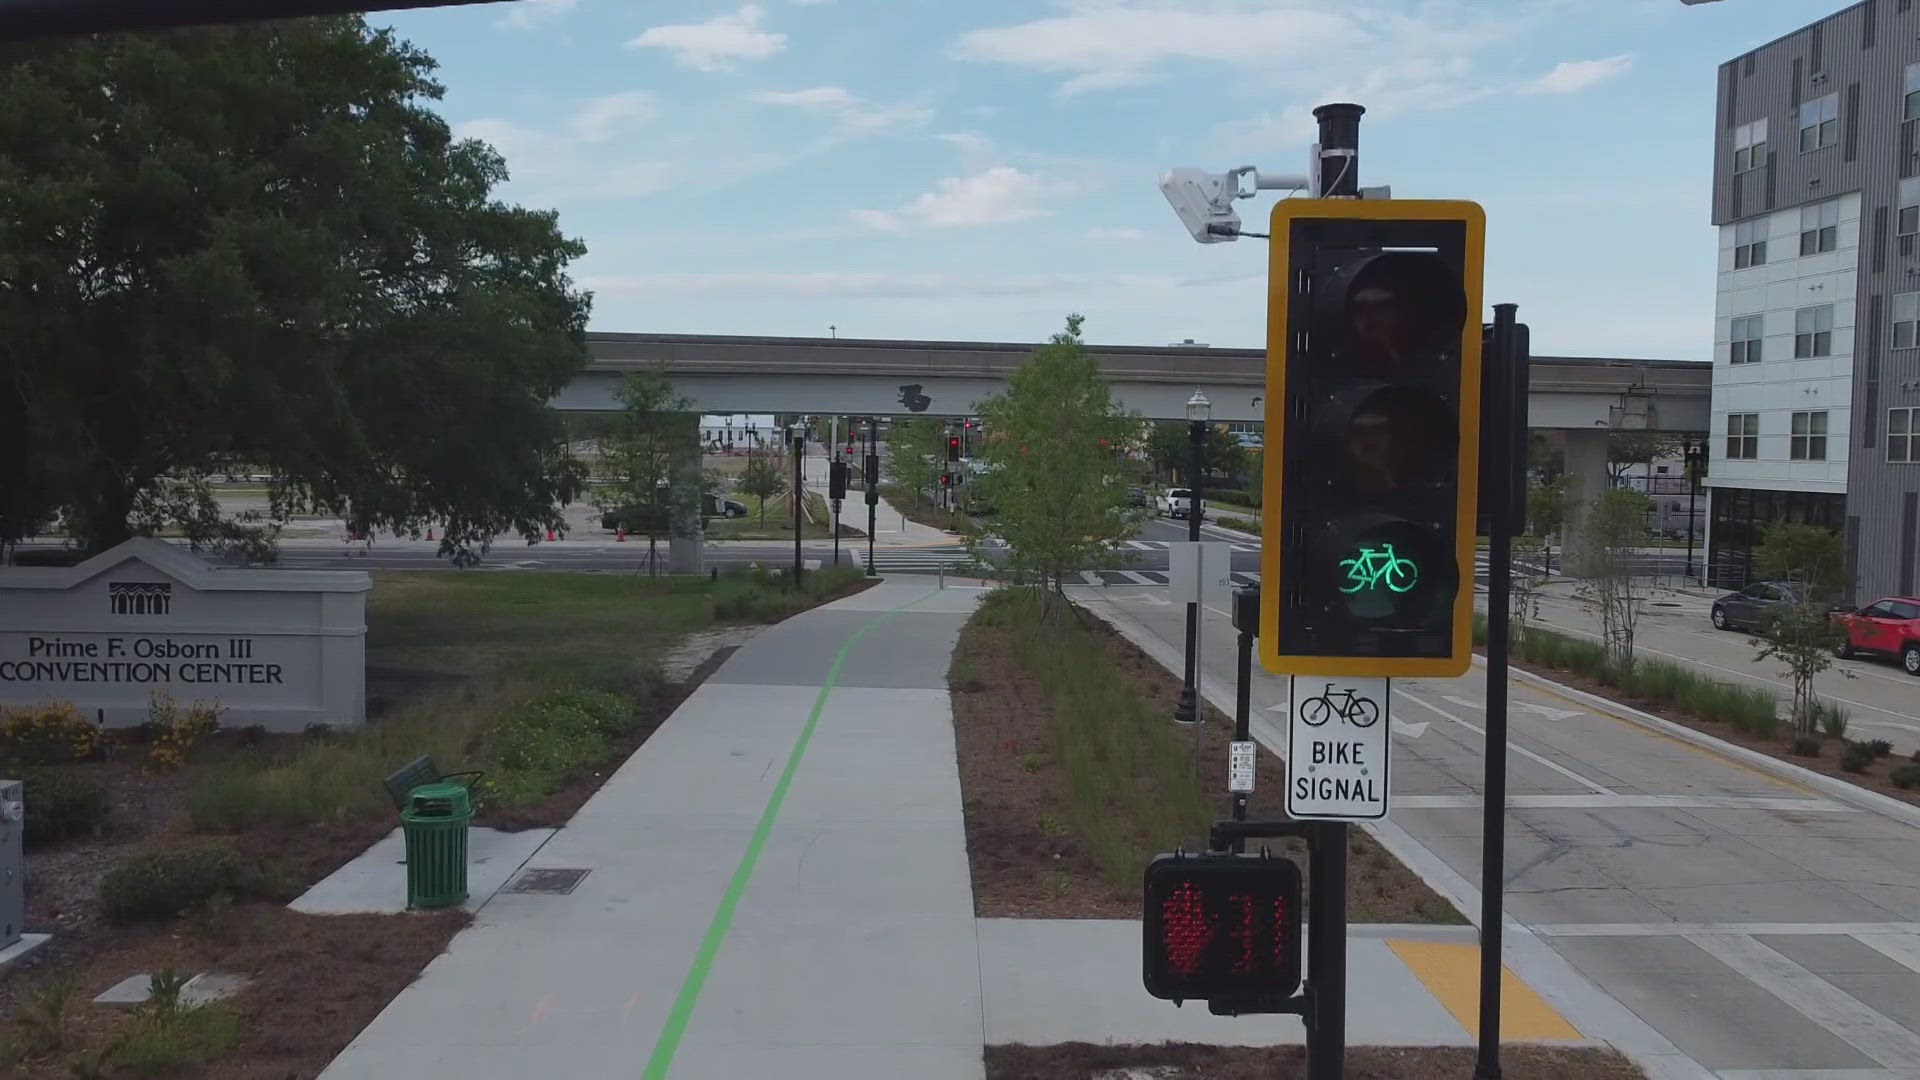 The 1.3-mile segment will eventually connect to 30 miles of trails throughout Jacksonville's Urban Core.